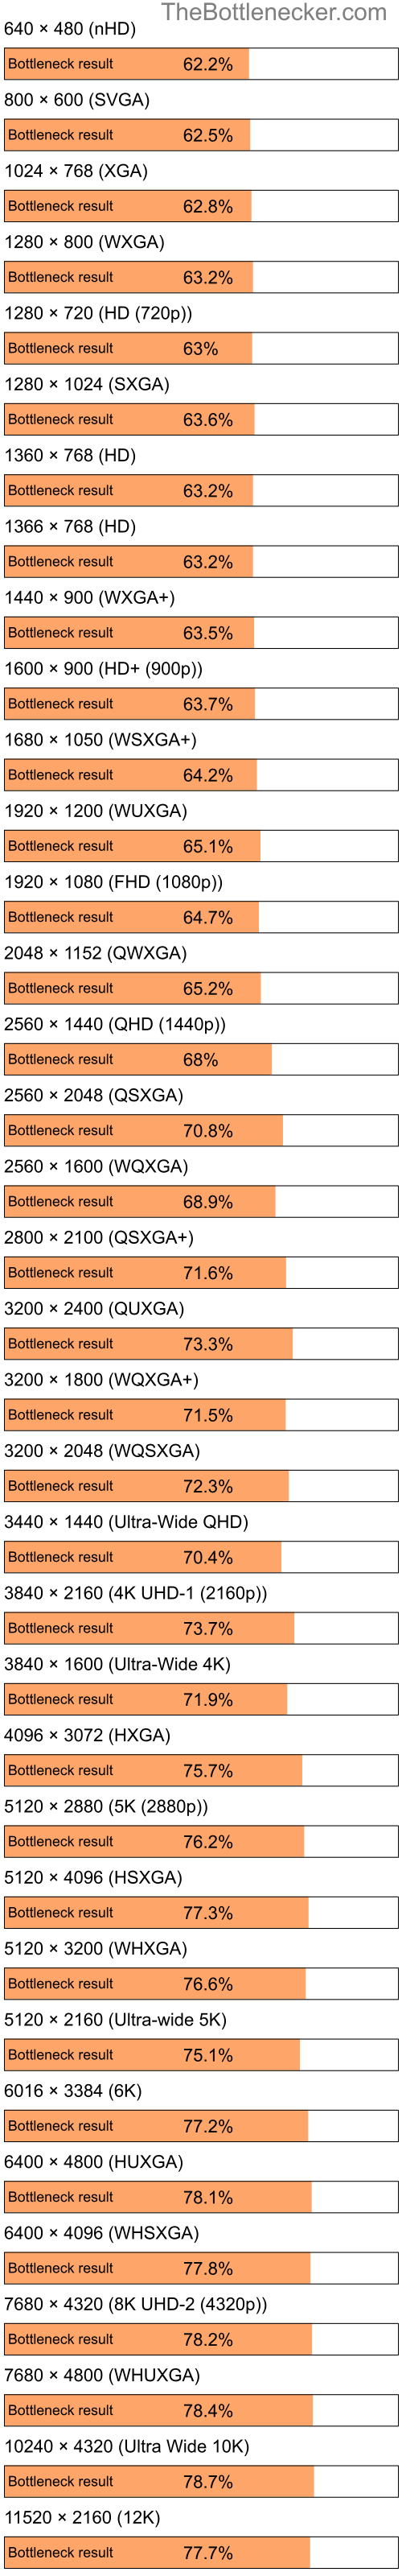 Bottleneck results by resolution for Intel Pentium 4 and AMD Mobility Radeon HD 4225 in Processor Intense Tasks